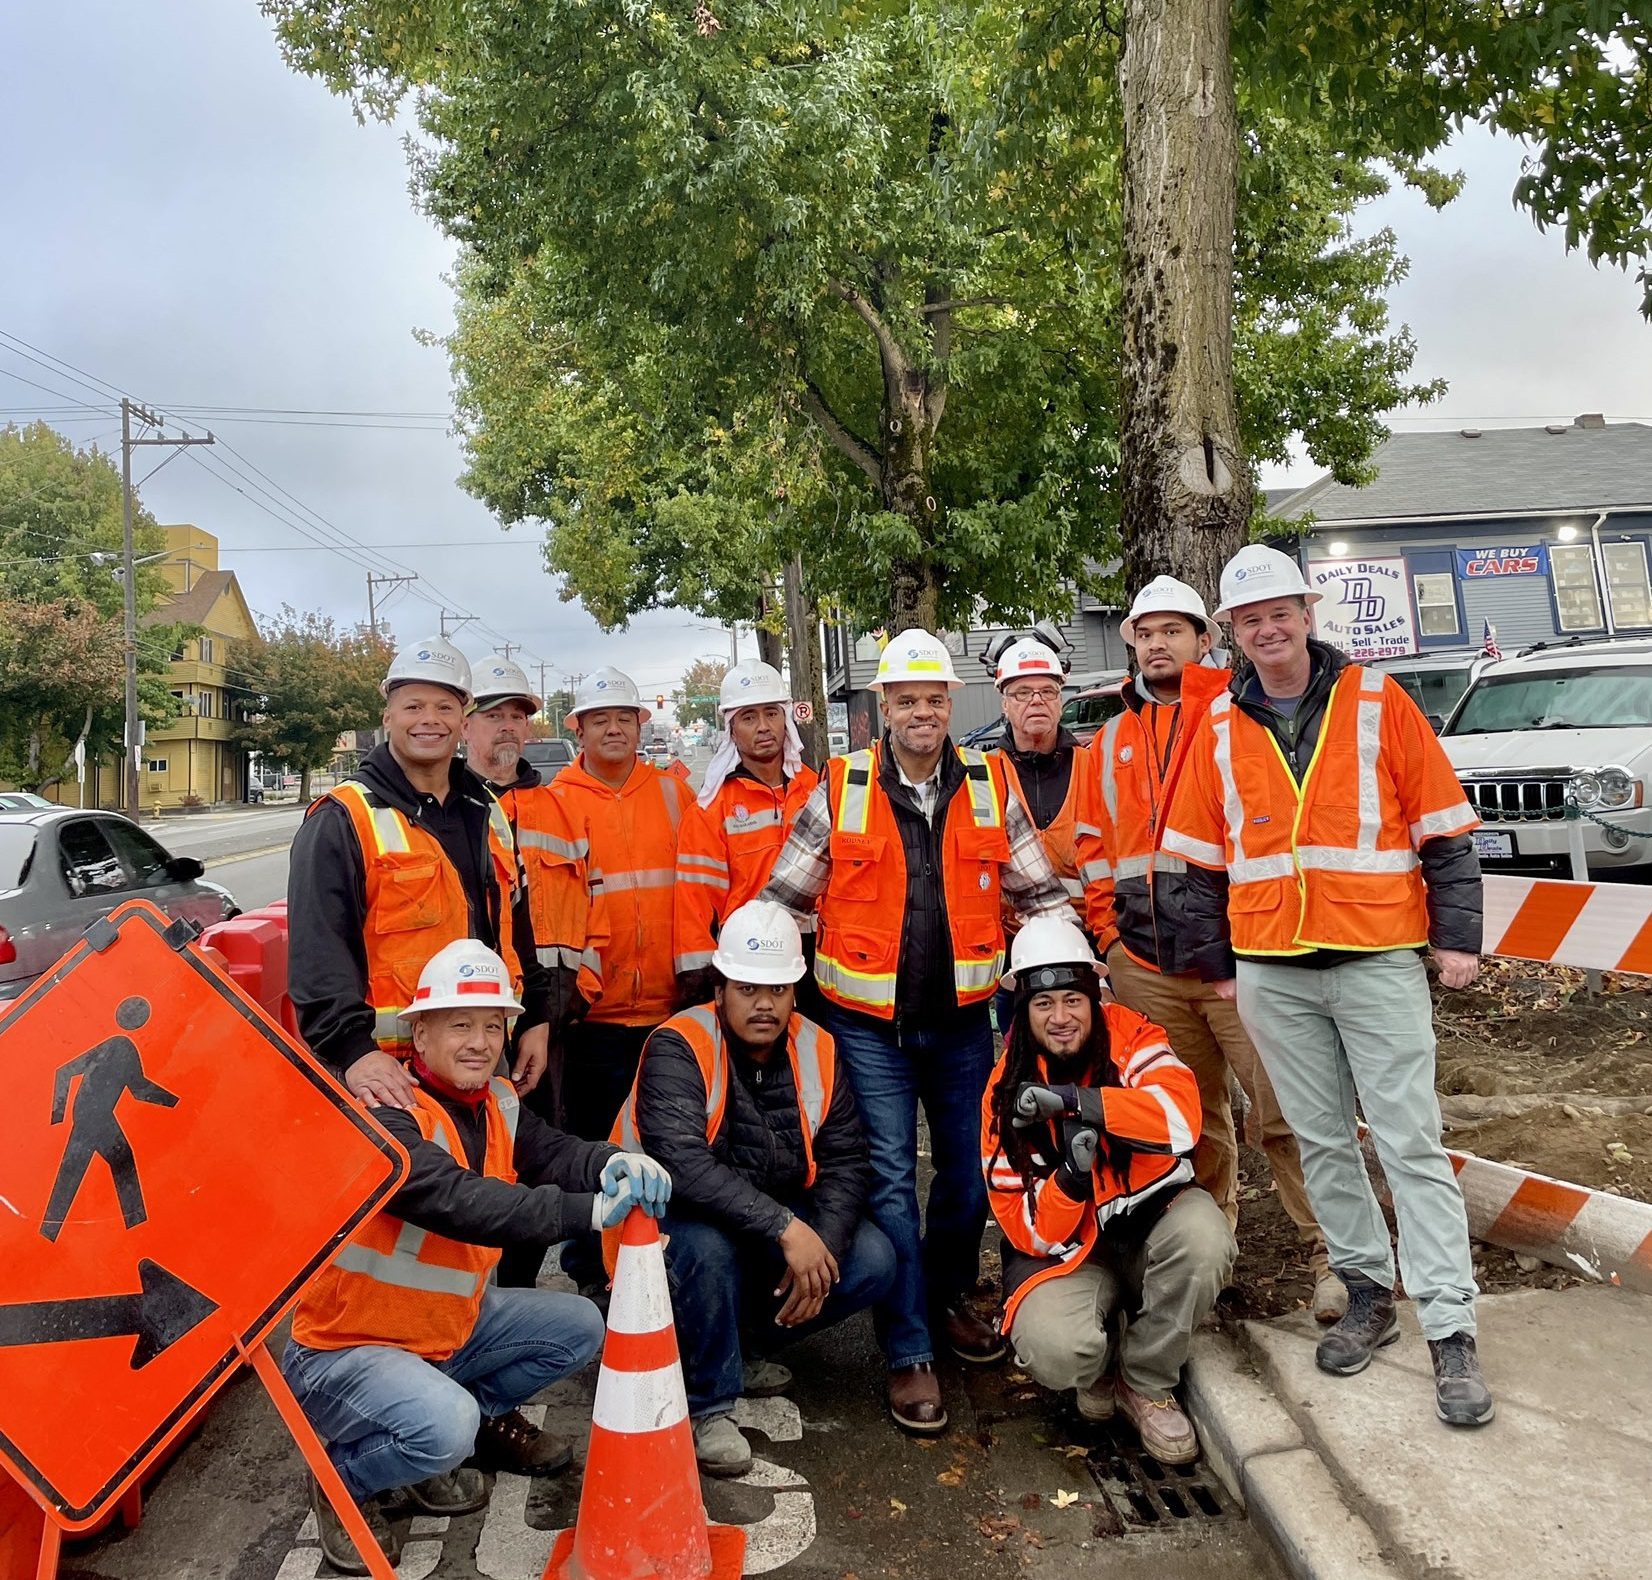 Elevent people wearing safety vests and hardhats smile at the camera near a work zone, with a large tree in the background. Cars and buildings are also in the background.